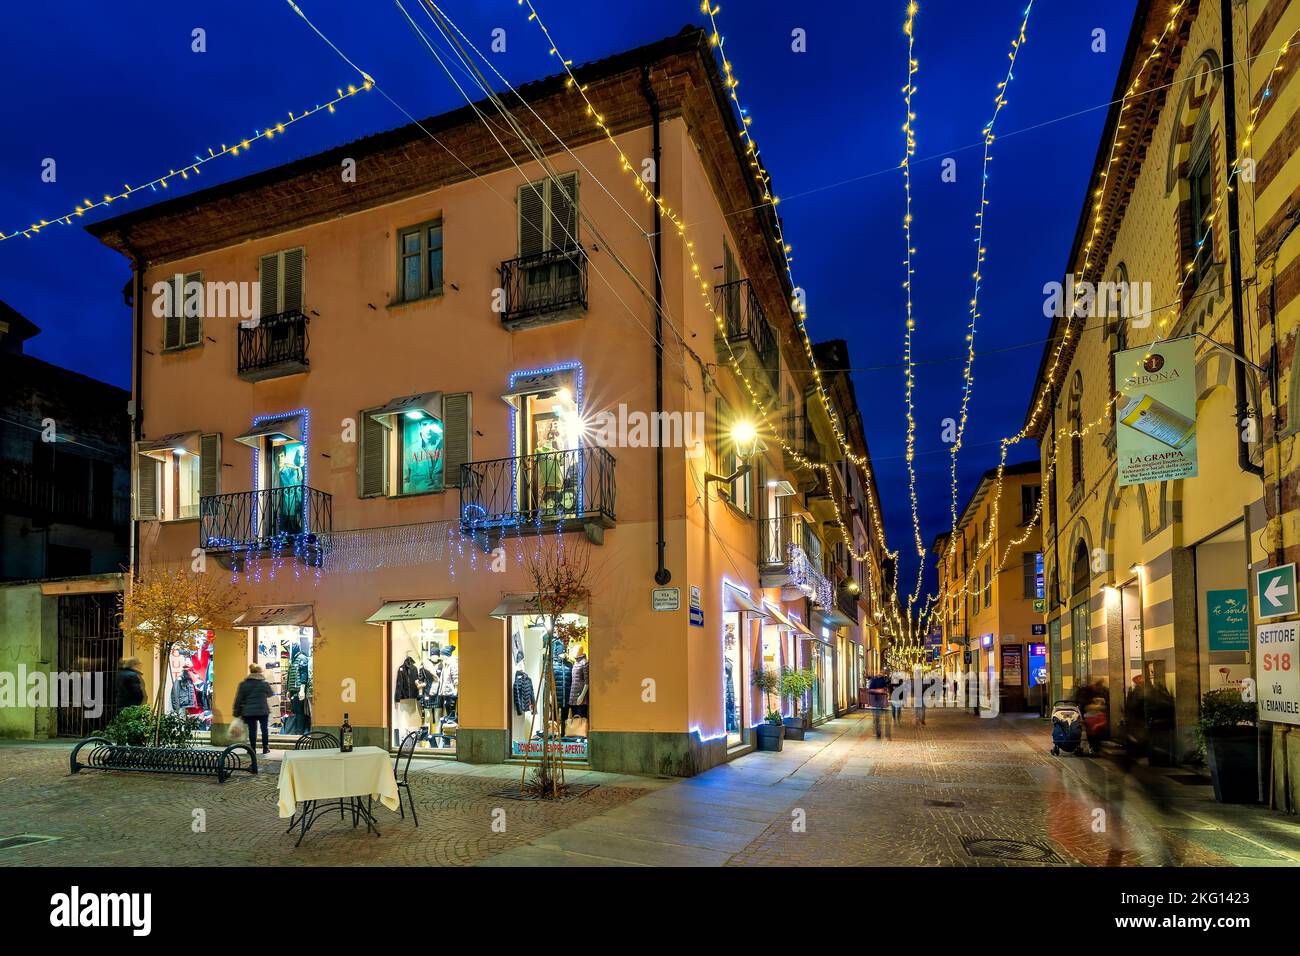 People on the cobblestone pedestrian street illuminated with Christmas lights among old buildings in Alba, Italy. Stock Photo